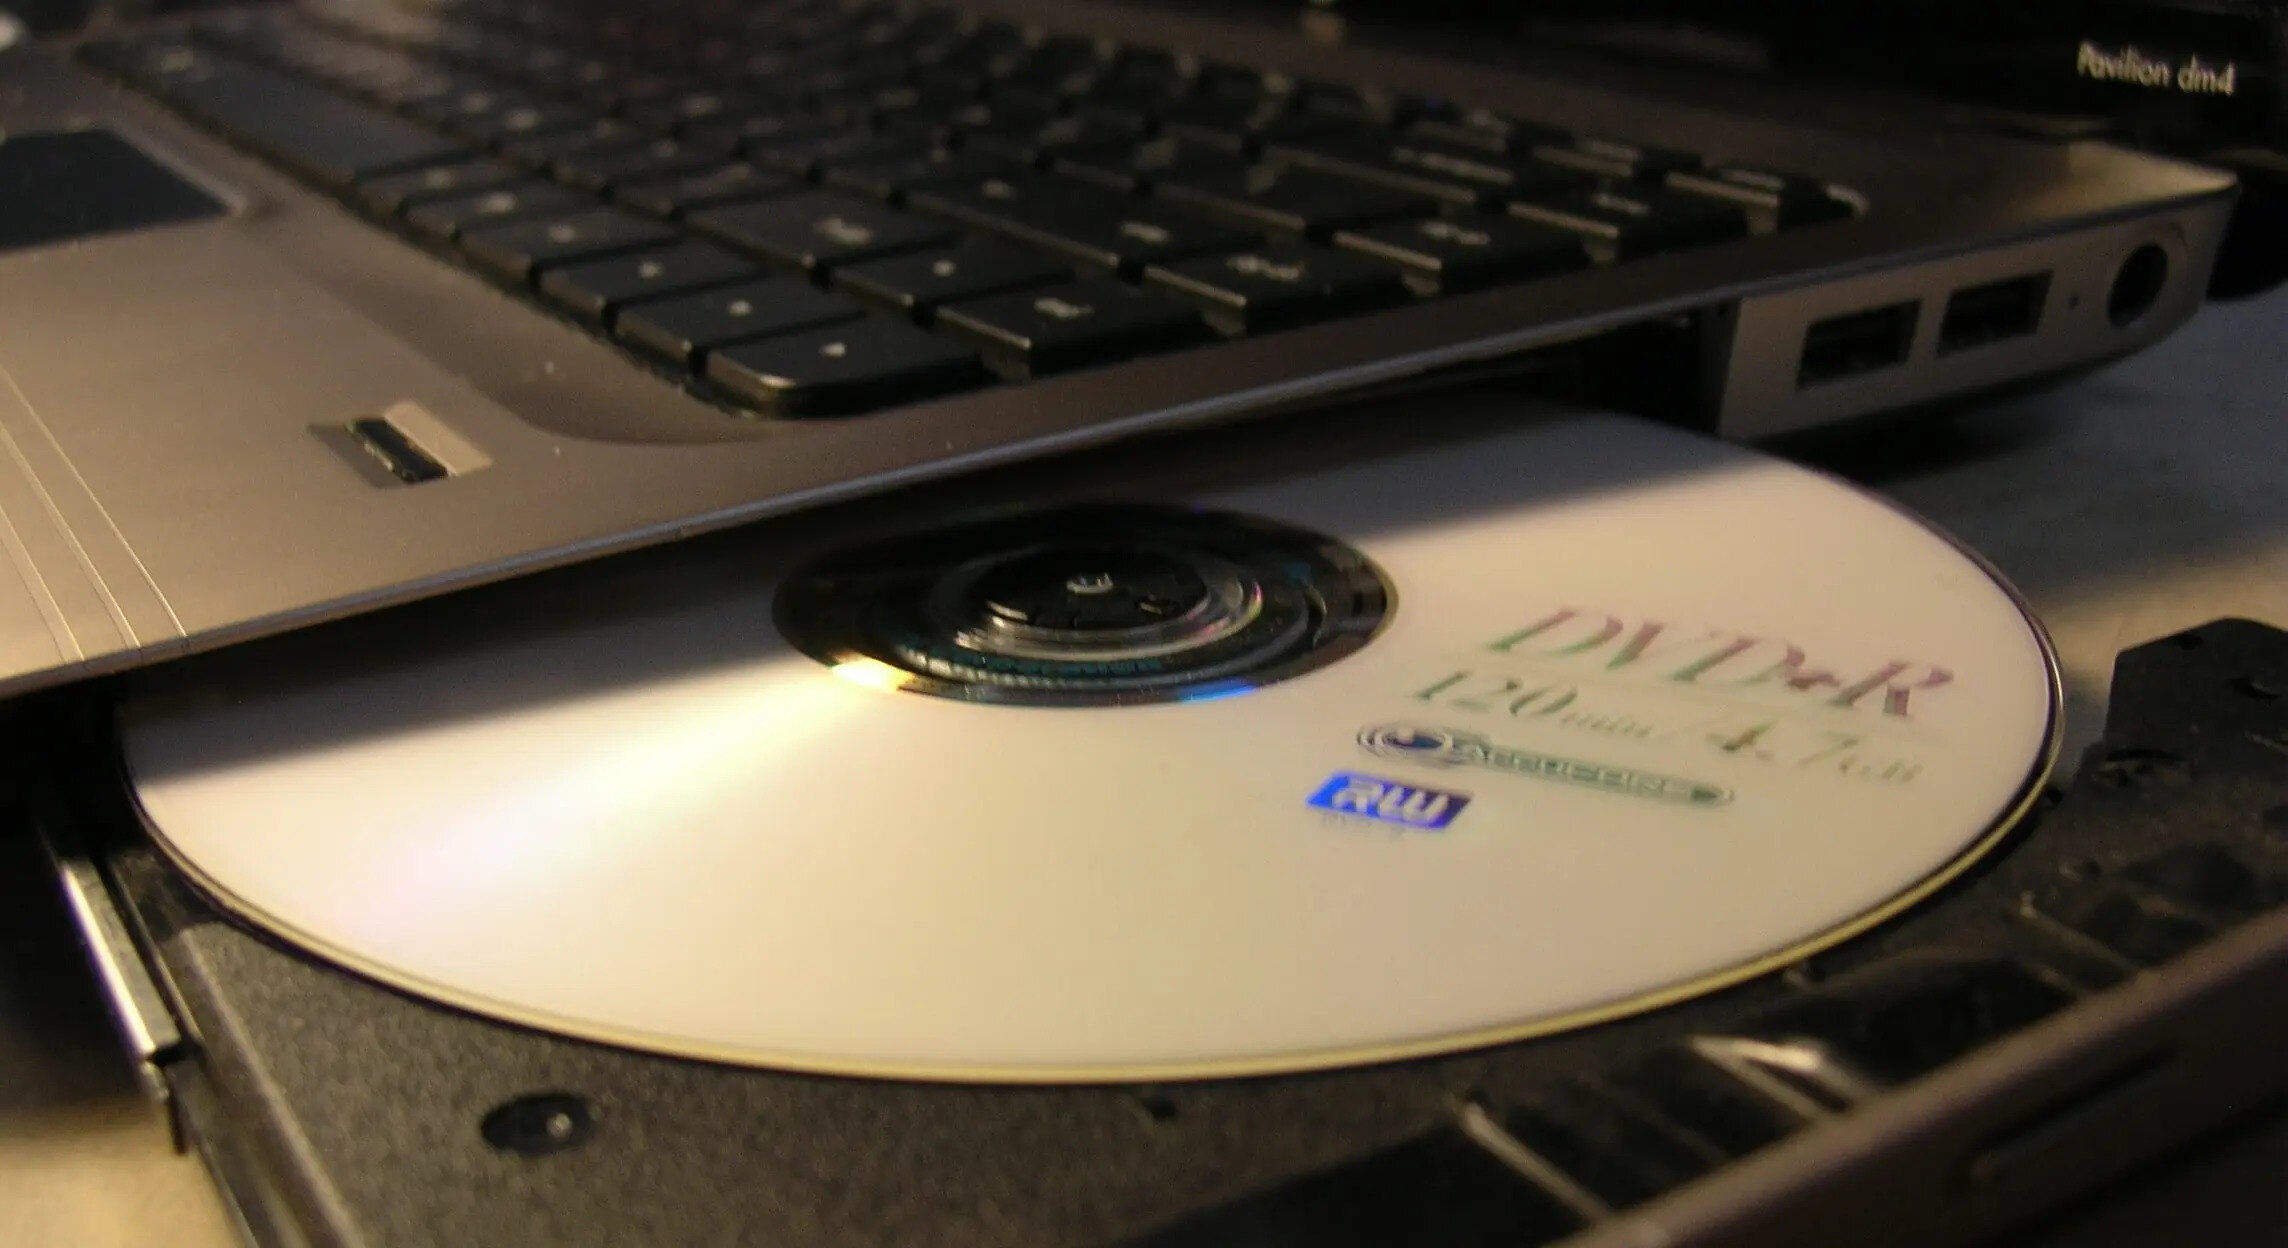 How To Boot From A CD, DVD, Or BD Disc